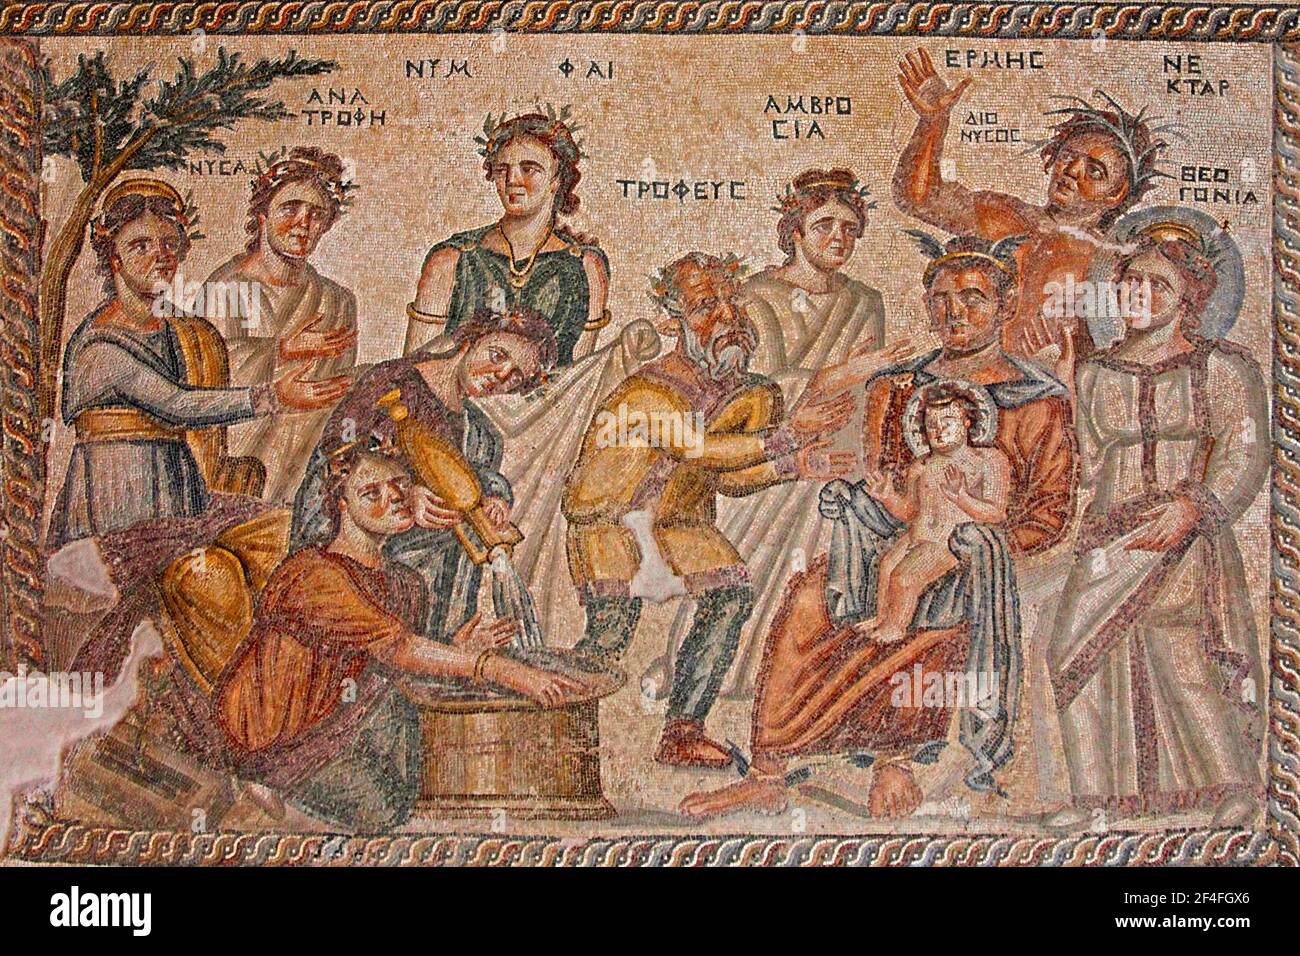 Mosaicn The scene represents the moment at which baby Dionysos, seated in the lap of Hermes, is about to be handed over to Tropheus, his future Stock Photo